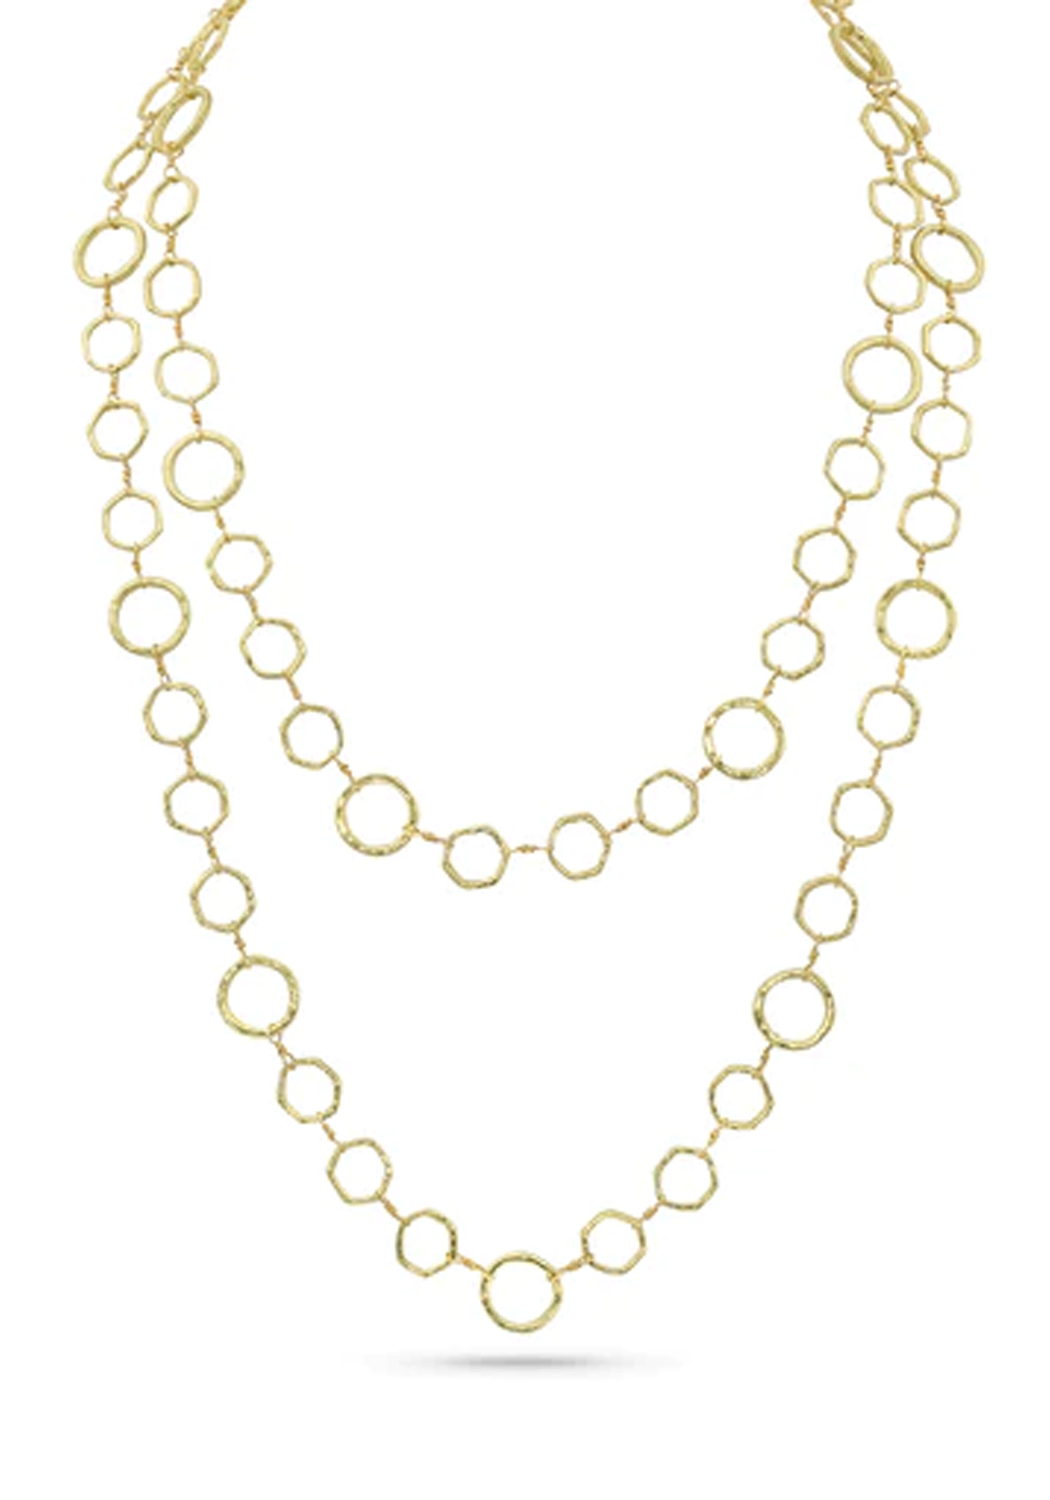 Dominique Cohen 18KYG Classic Opera Chain Necklace | Ref. N06-840YG | OsterJewelers.com